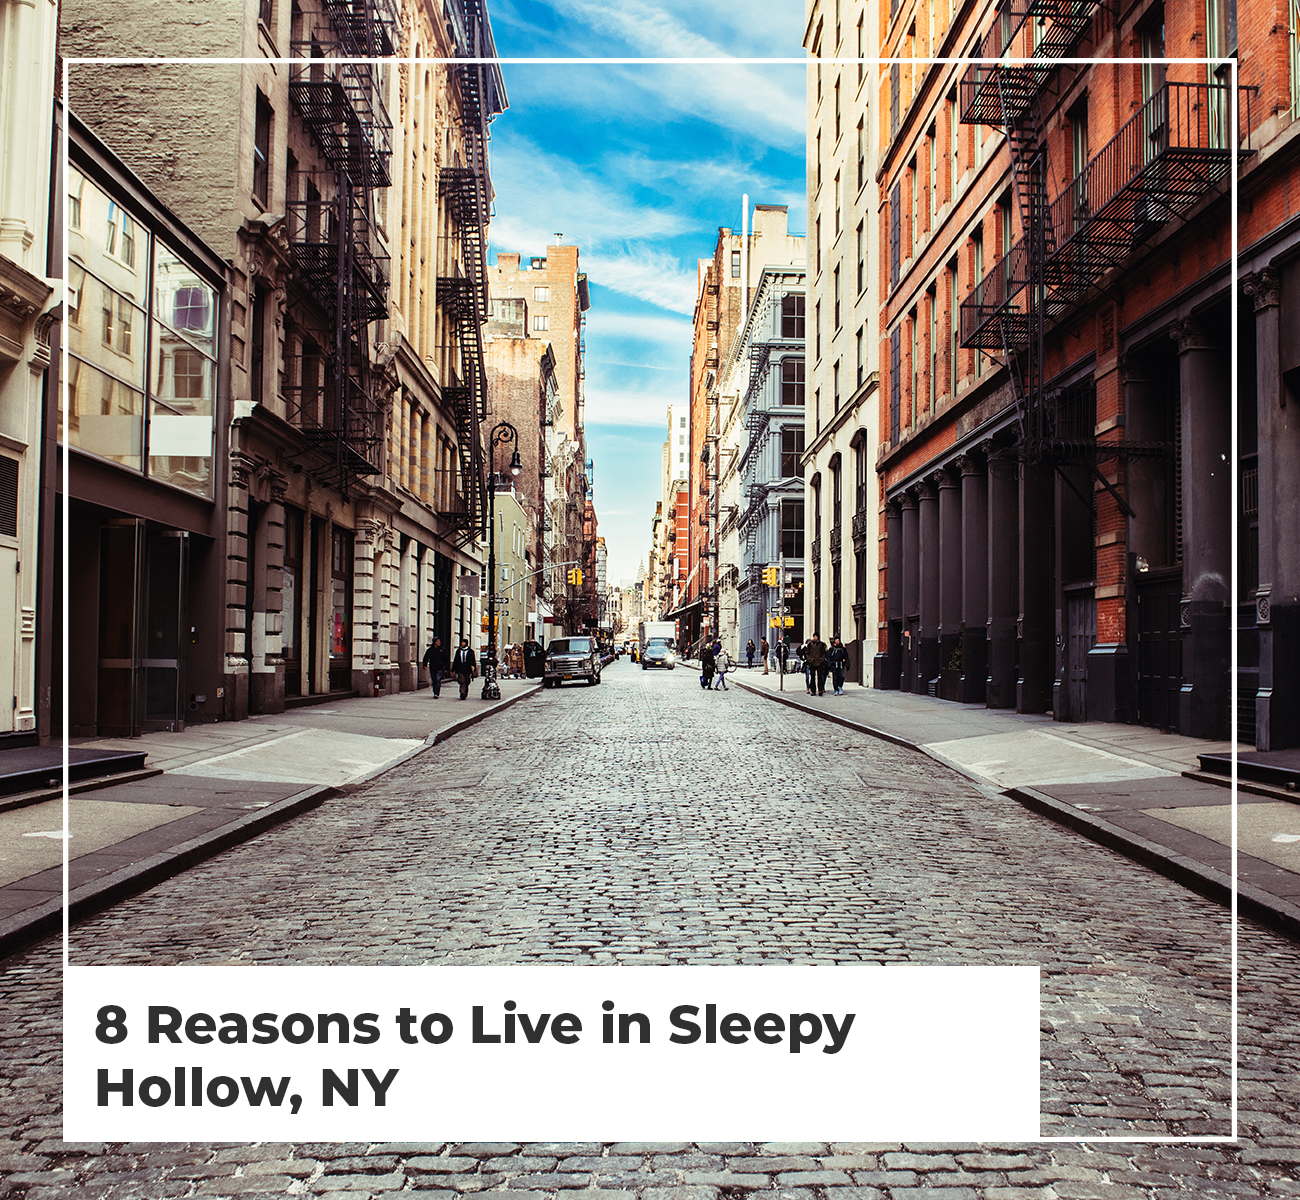 8 Reasons To Live In Sleepy Hollow - Main Image